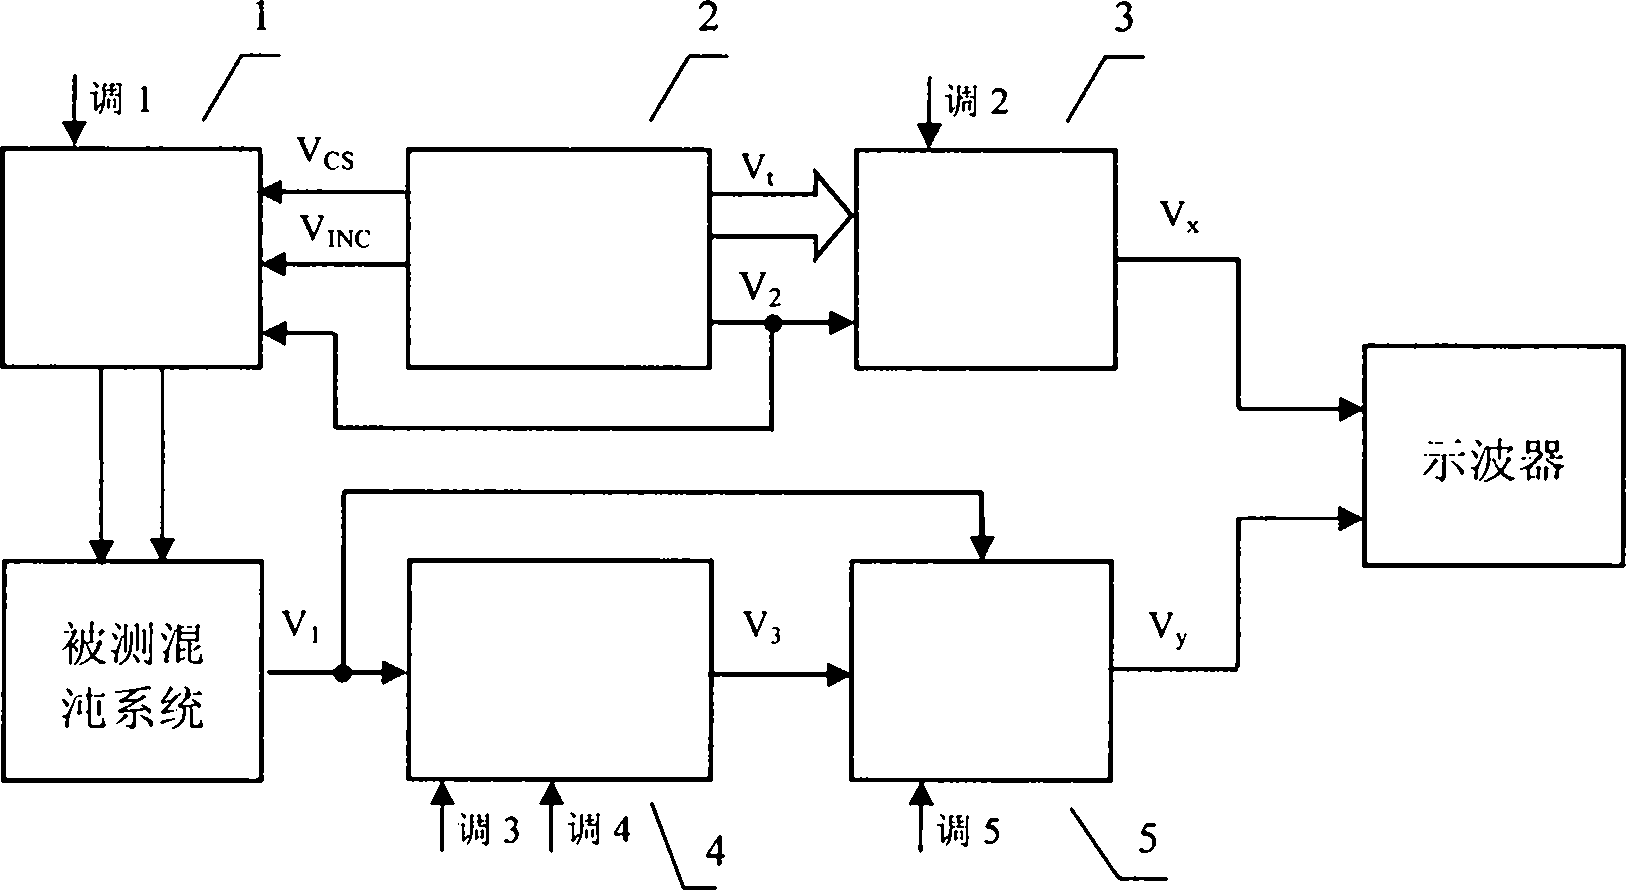 CPLD-based oscilloscope display circuit for observing chaotic system bifurcations